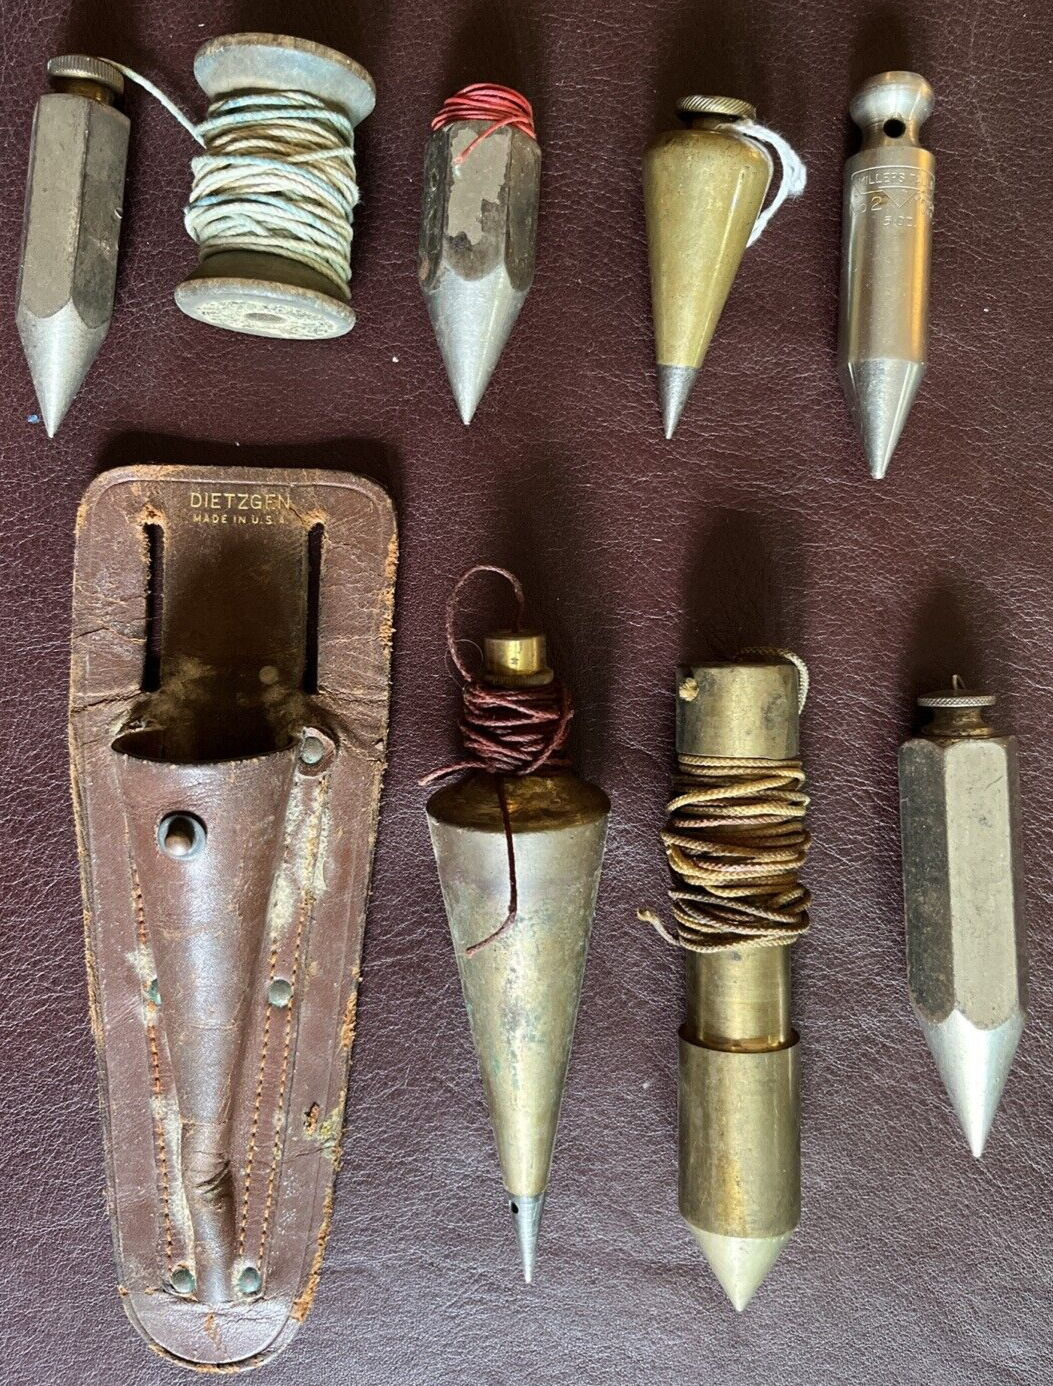 7 Plumb Bob Lot/Collection Antique/Vintage Tools, 1 w/ Leather Holster Some ID'D